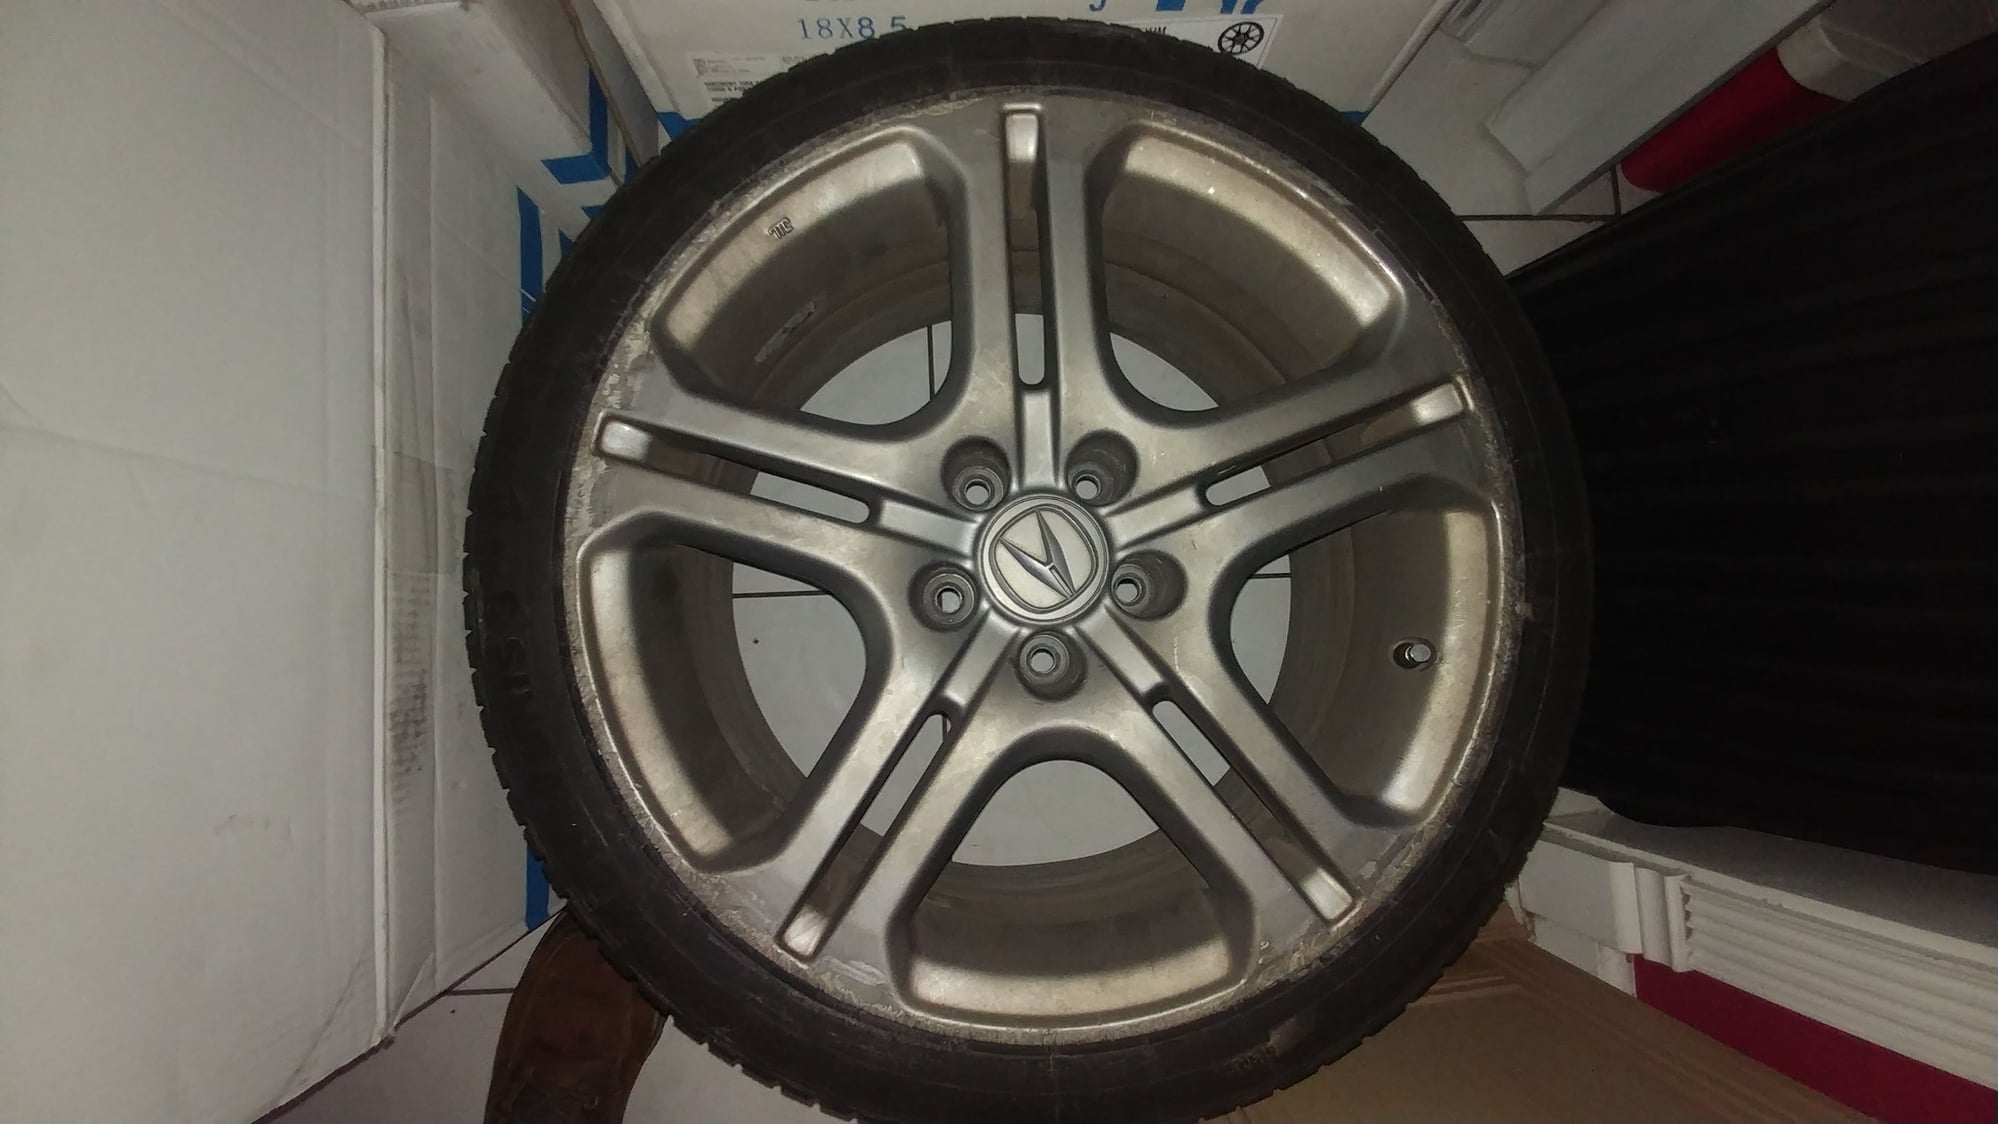 2008 Acura TL - 18x8.5 A-Spec Wheels - Wheels and Tires/Axles - $300 - Houston, TX 77053, United States